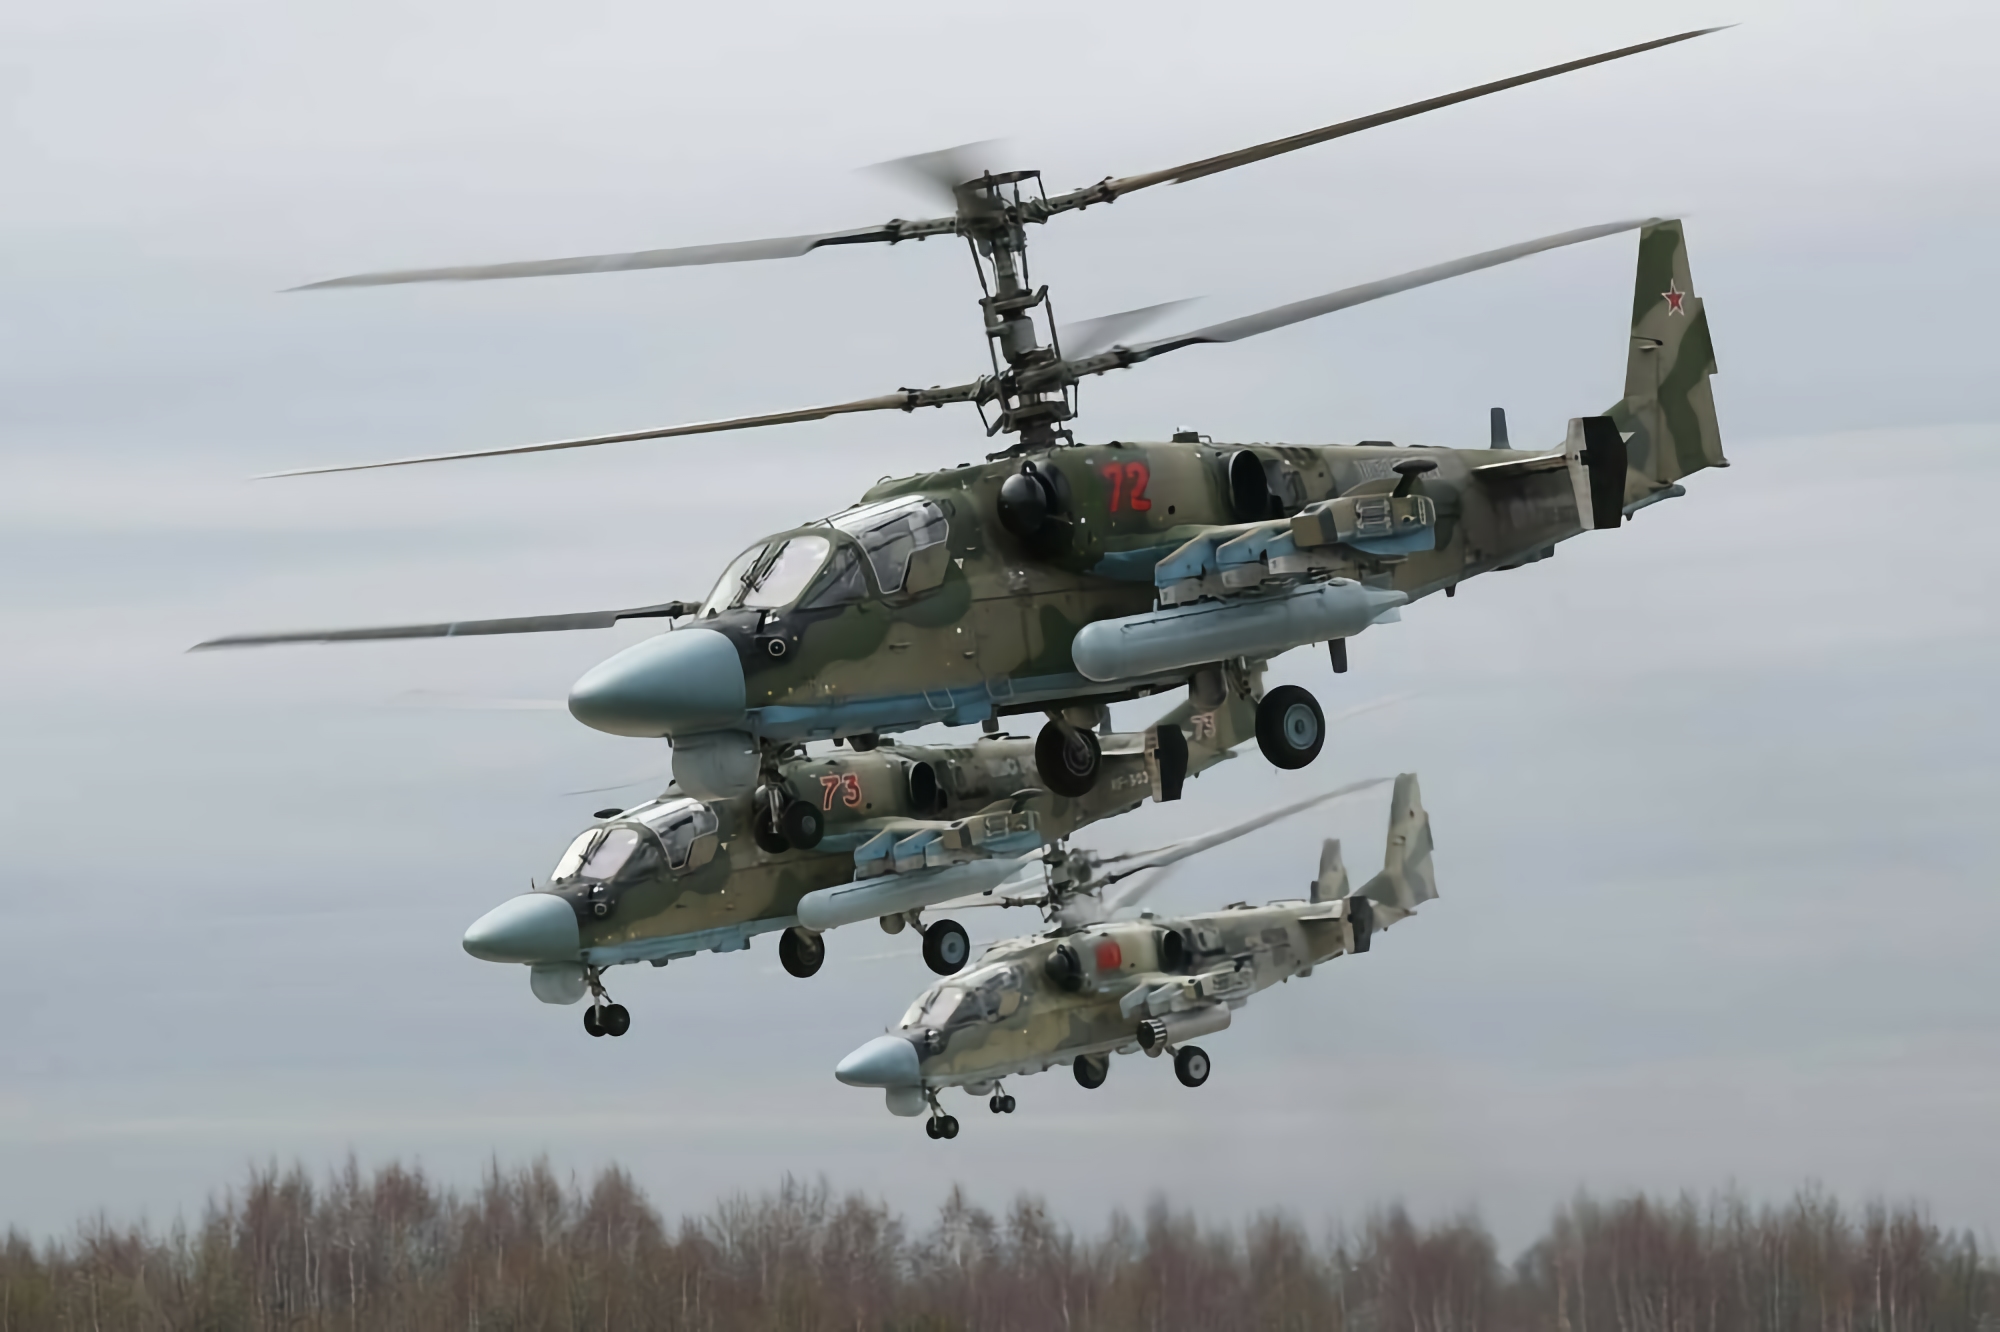 Minus $64,000,000: AFU shot down 4 Russian Ka-52 attack helicopters in 18 minutes